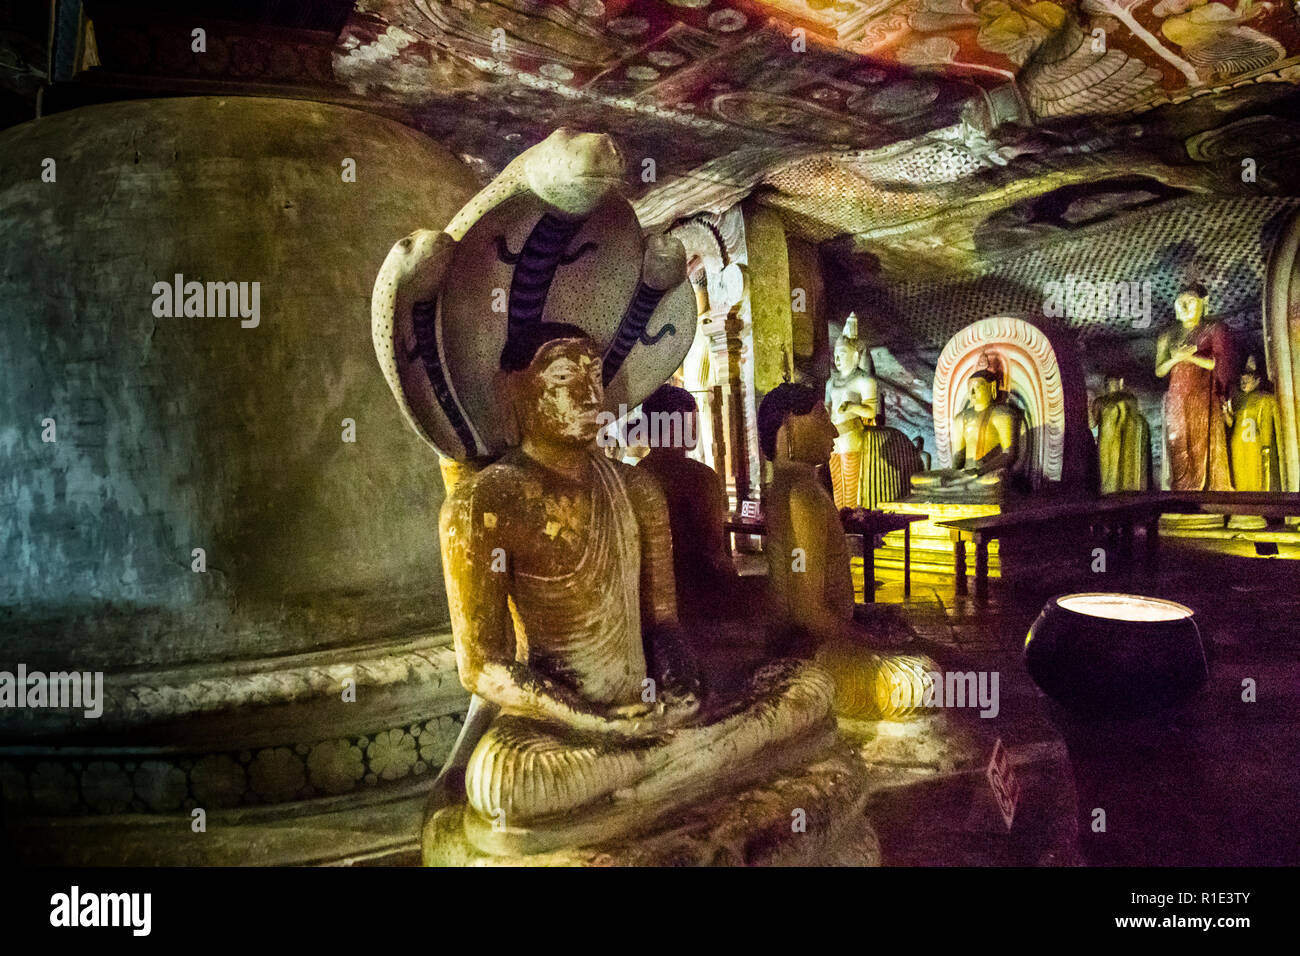 Dambulla Cave Temple, Sri Lanka. There are more than 48 Buddha statues in the cave temples of Dambulla. Naga statues represent Buddha protected by a king cobra while meditating Stock Photo